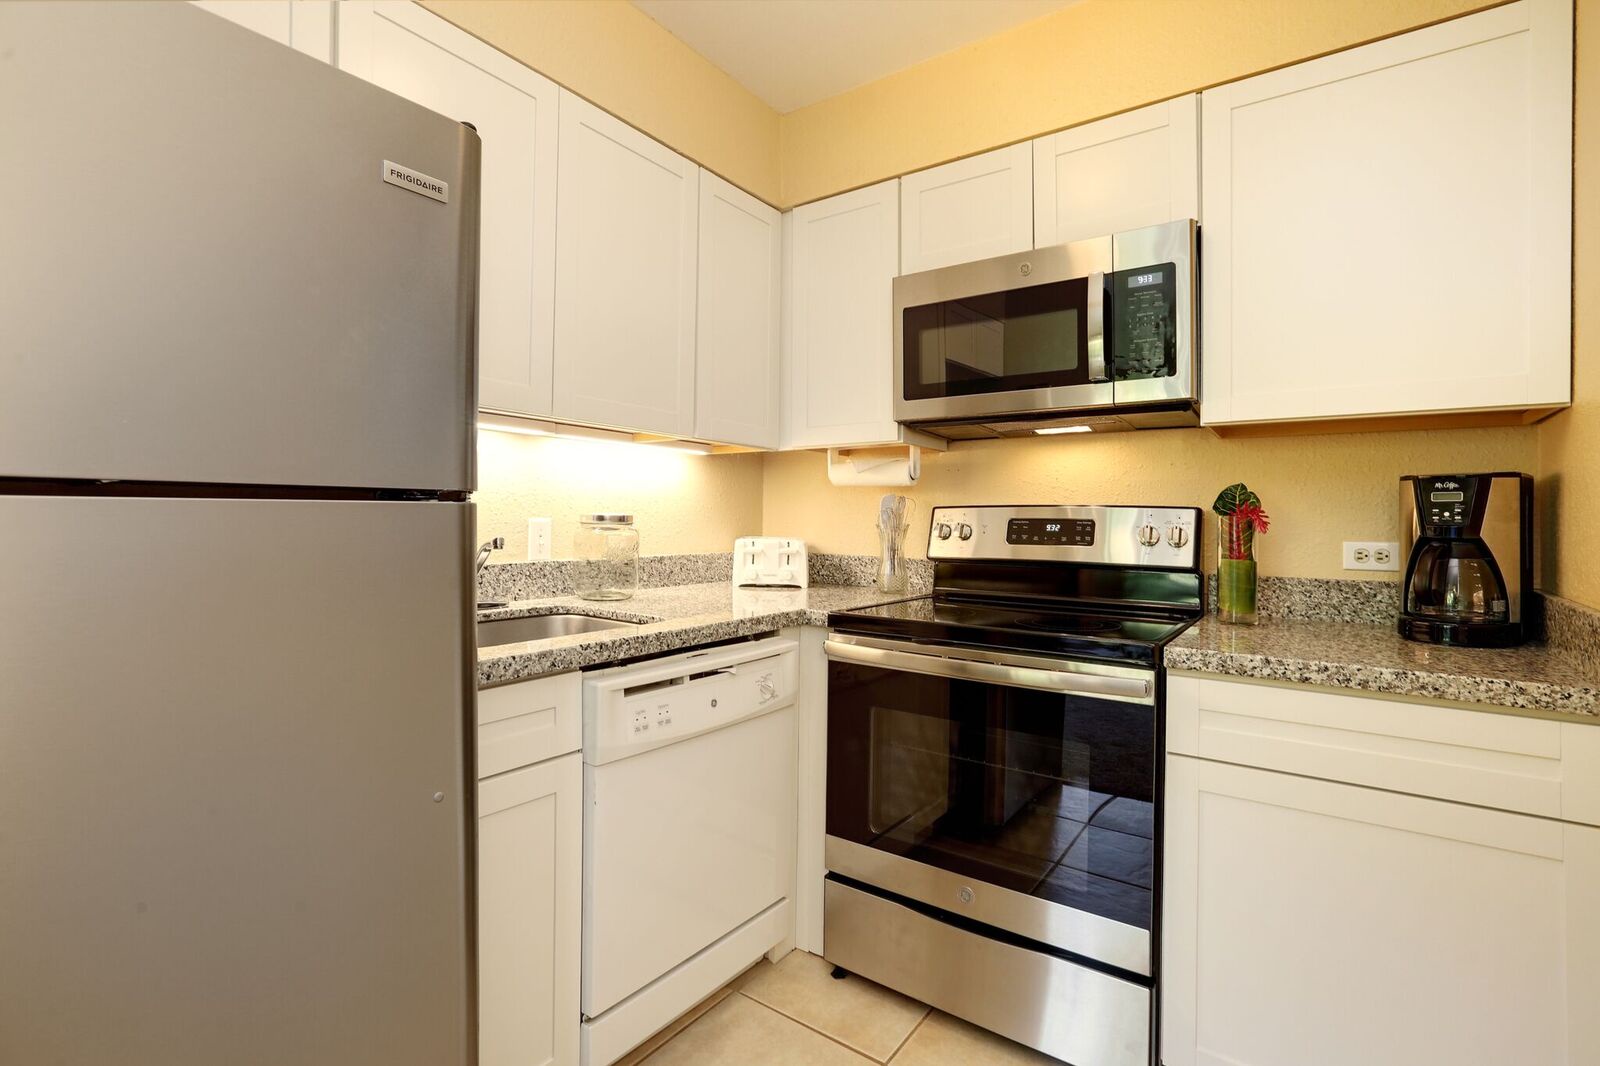 Lahaina Vacation Rentals, Paki Maui 313 - Fresh updated kitchen with stainless steel appliances